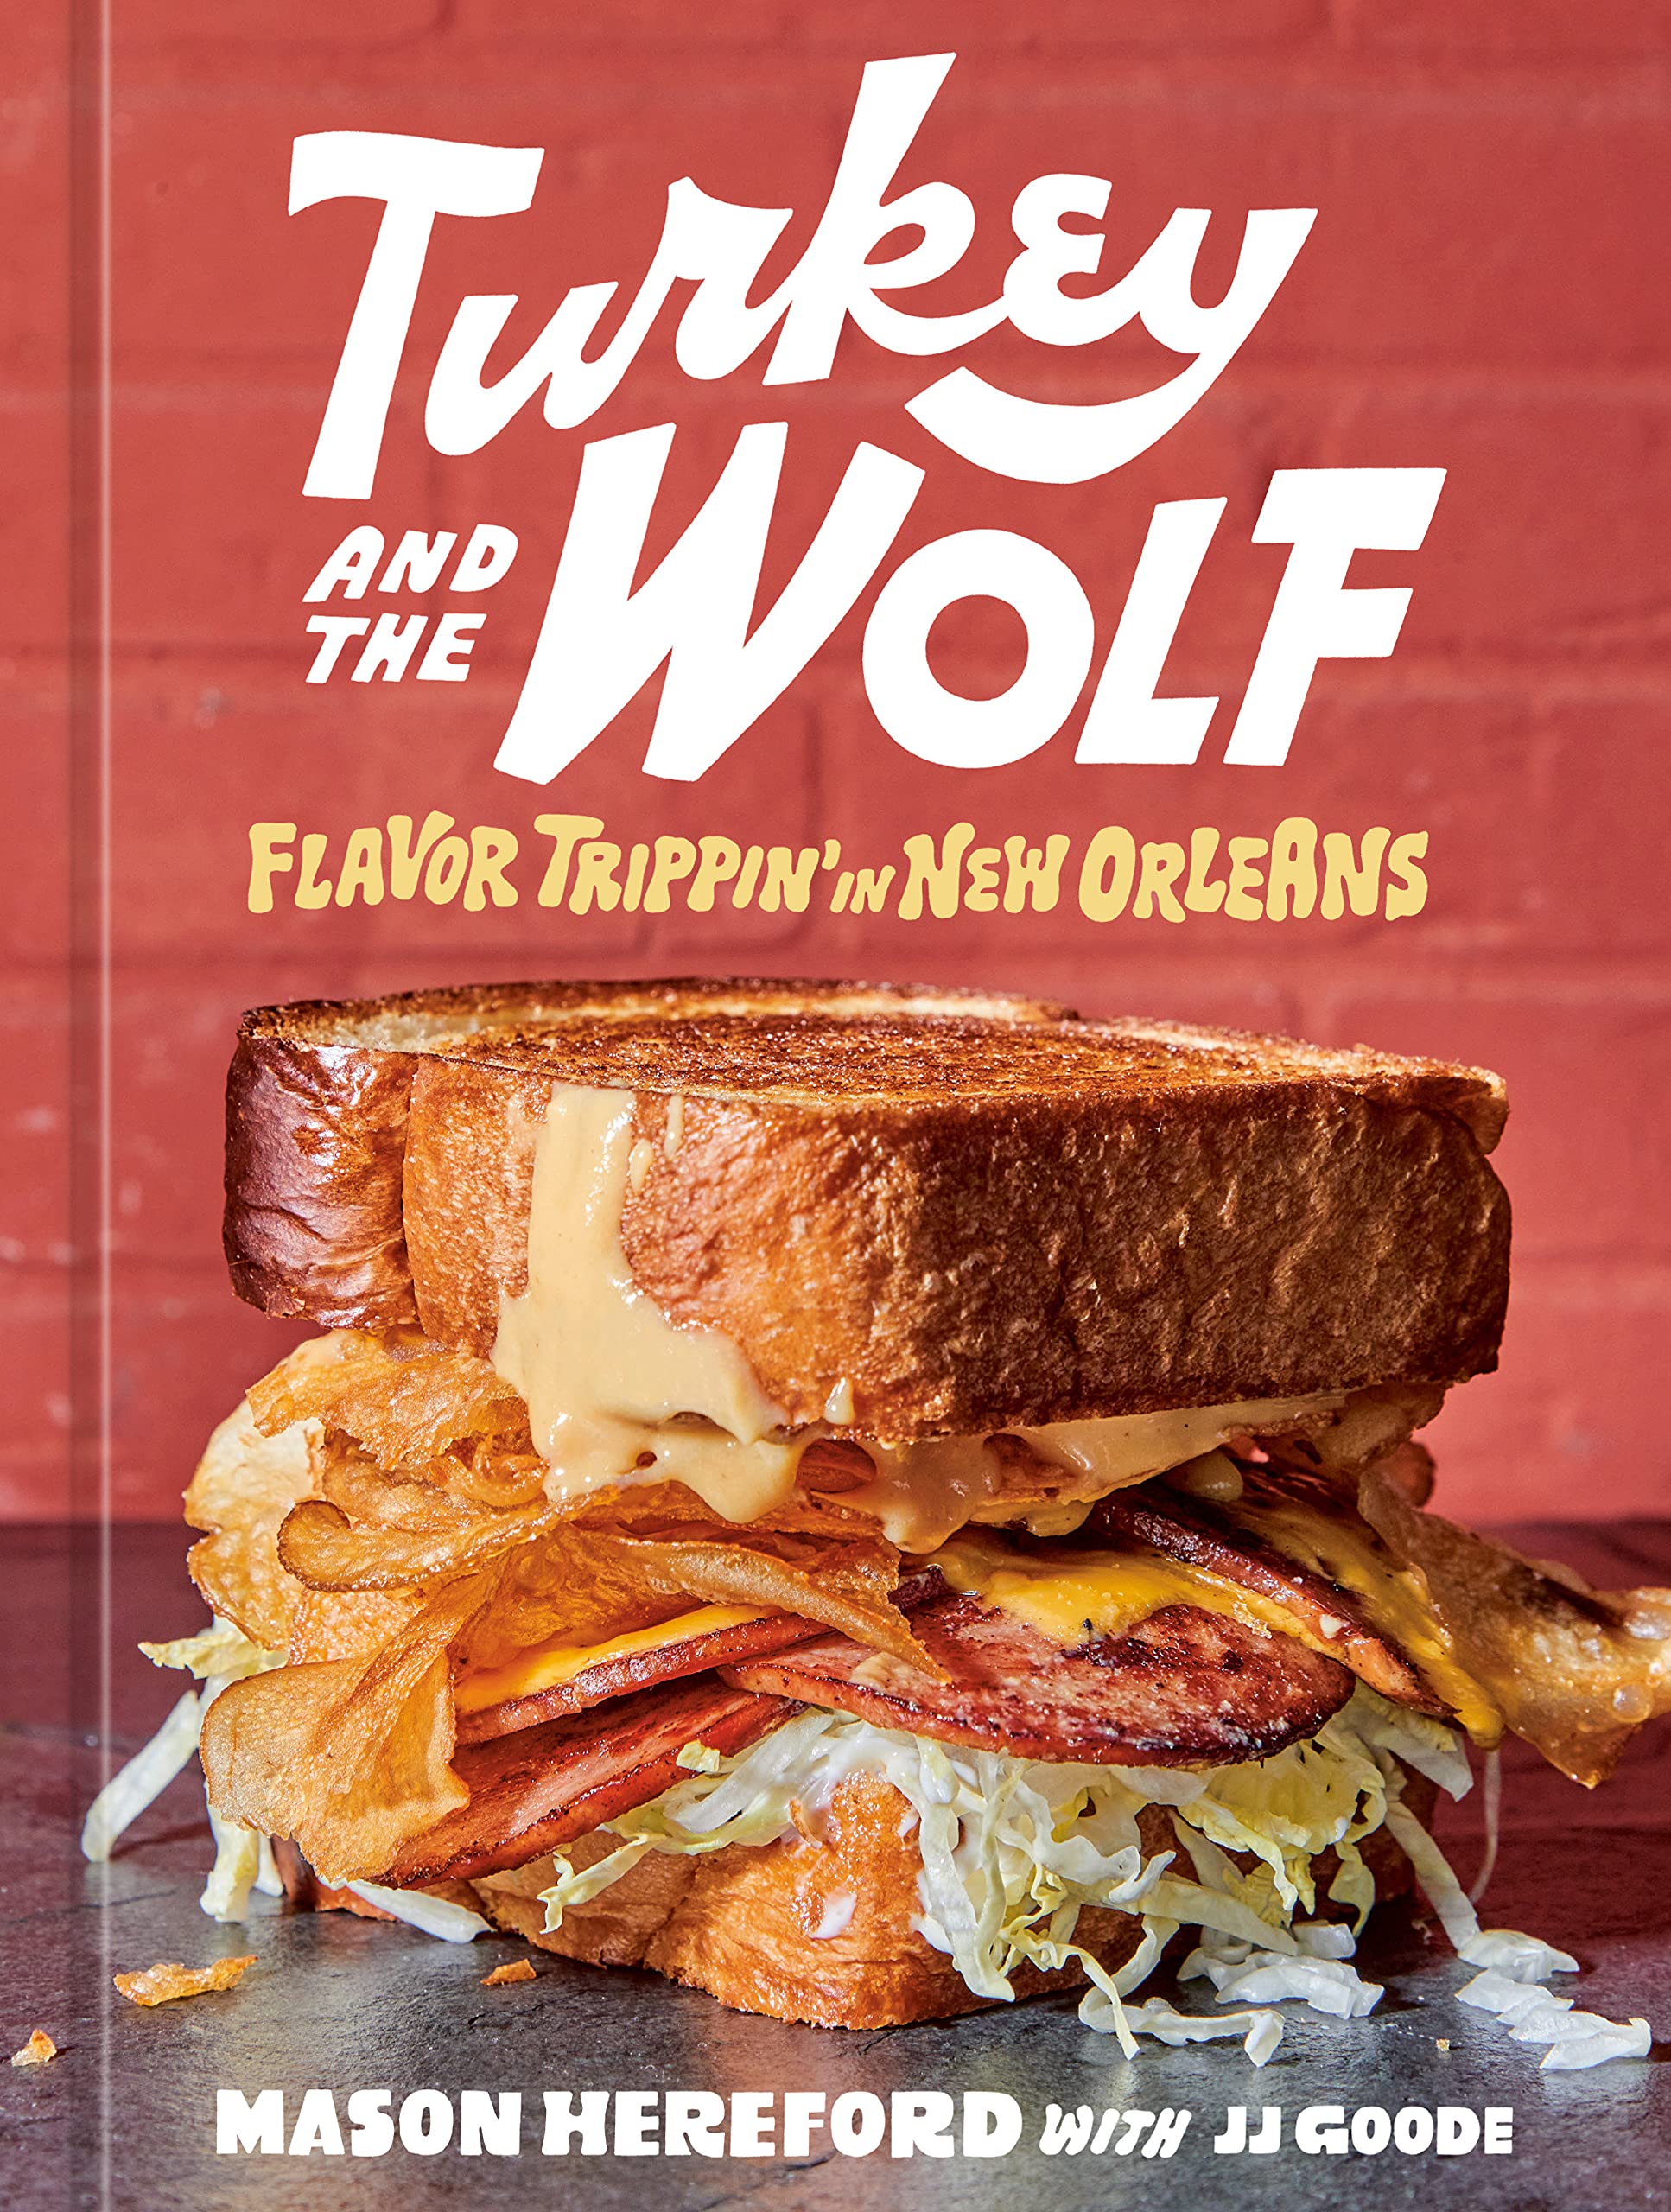 Turkey and the Wolf: Flavor Trippin' in New Orleans (Mason Hereford, JJ Goode) *Signed*